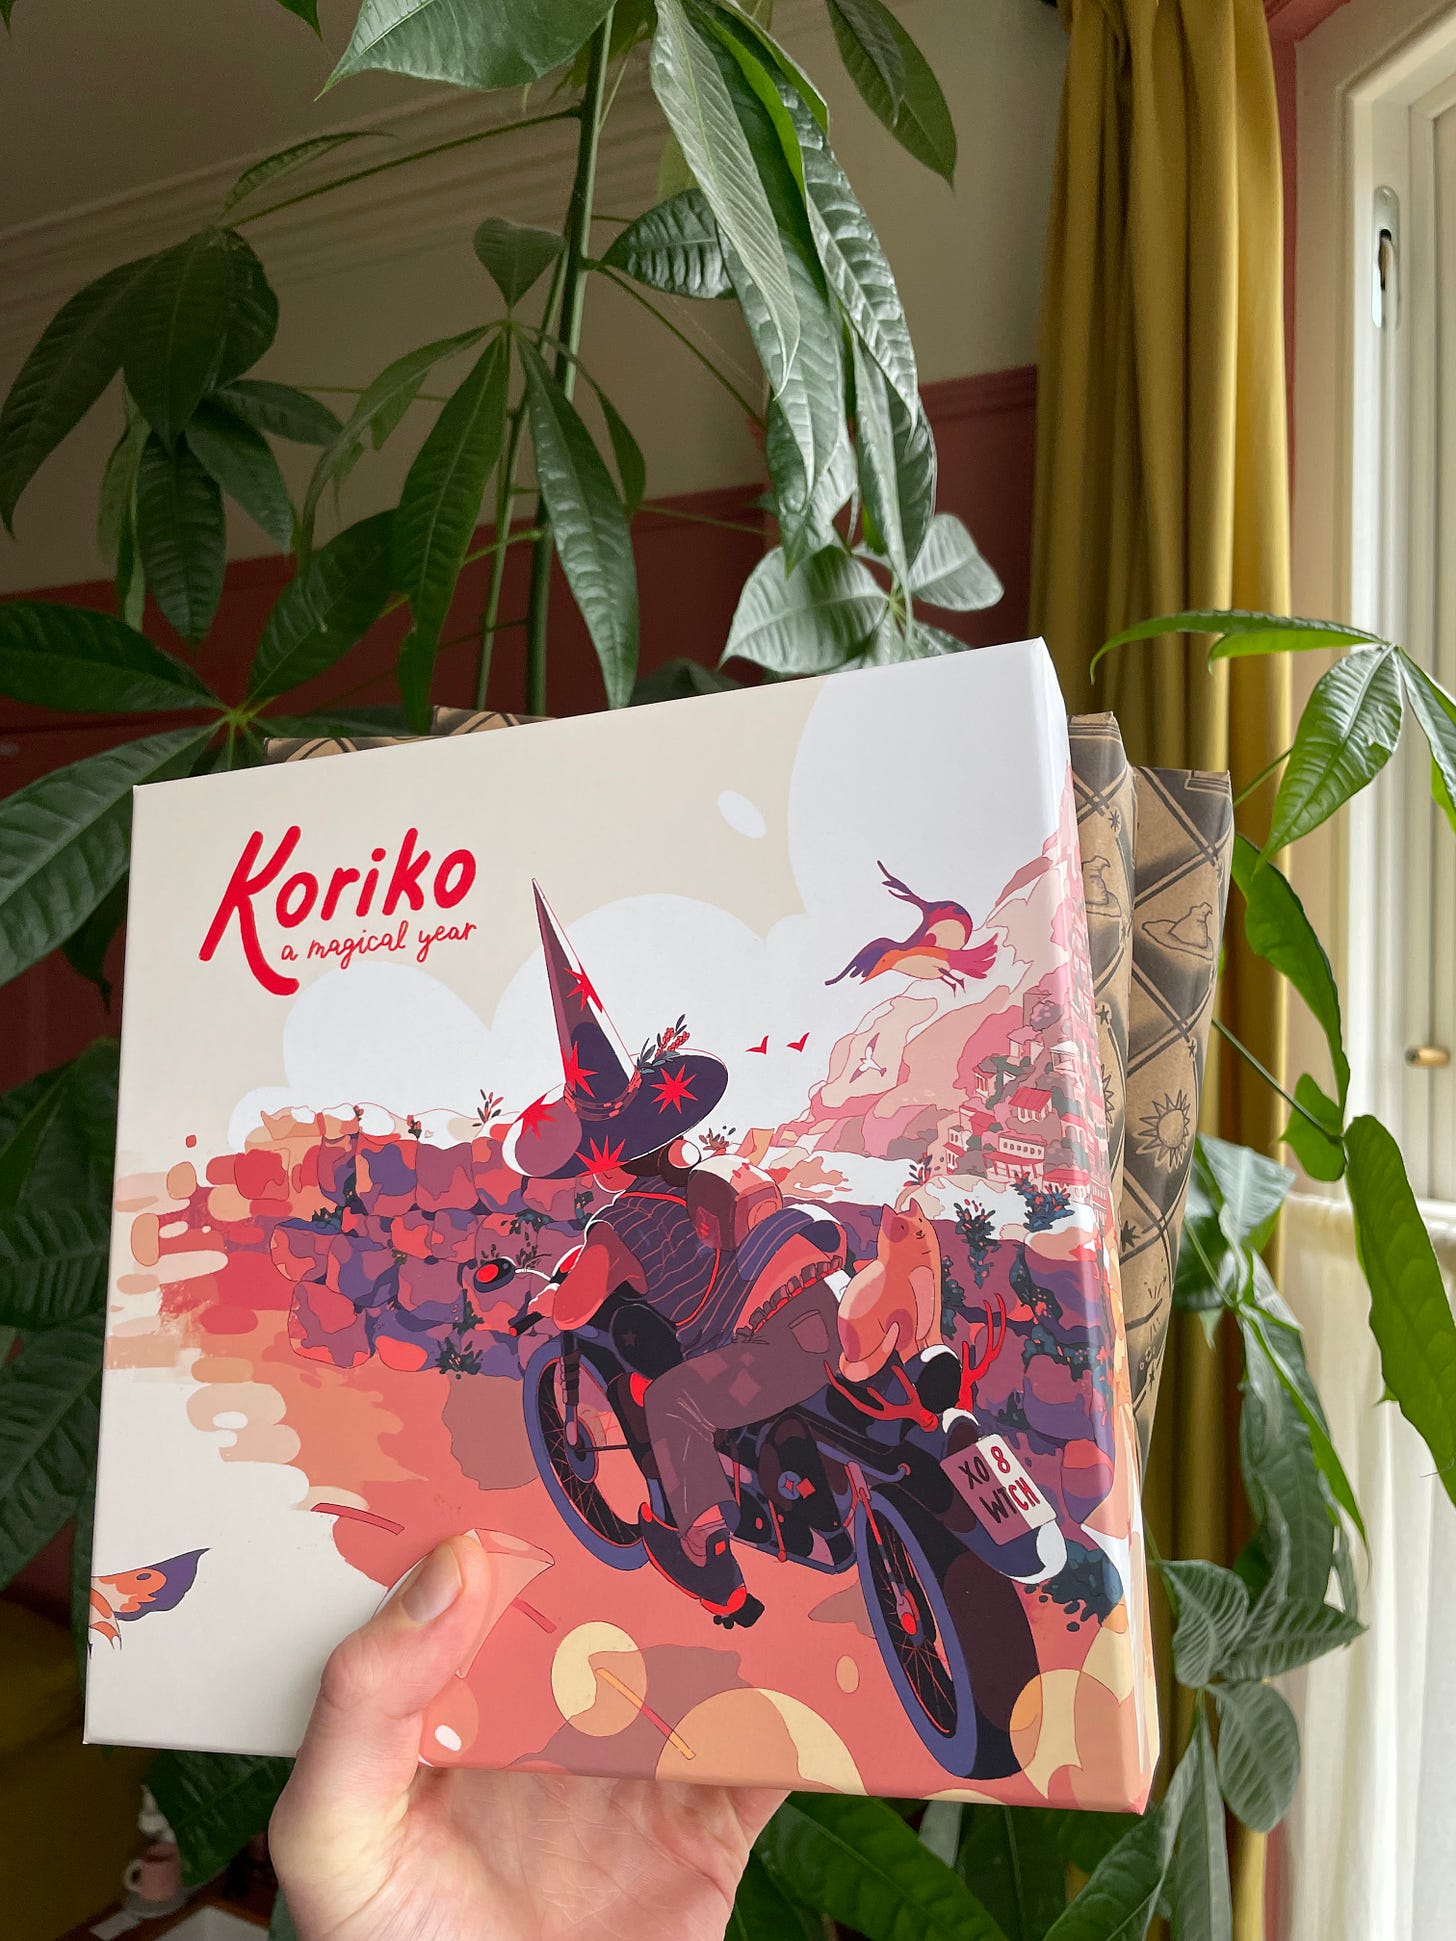 A photo of the Koriko boxed edition, unwrapped, with two copies wrapped in brown paper behind it.